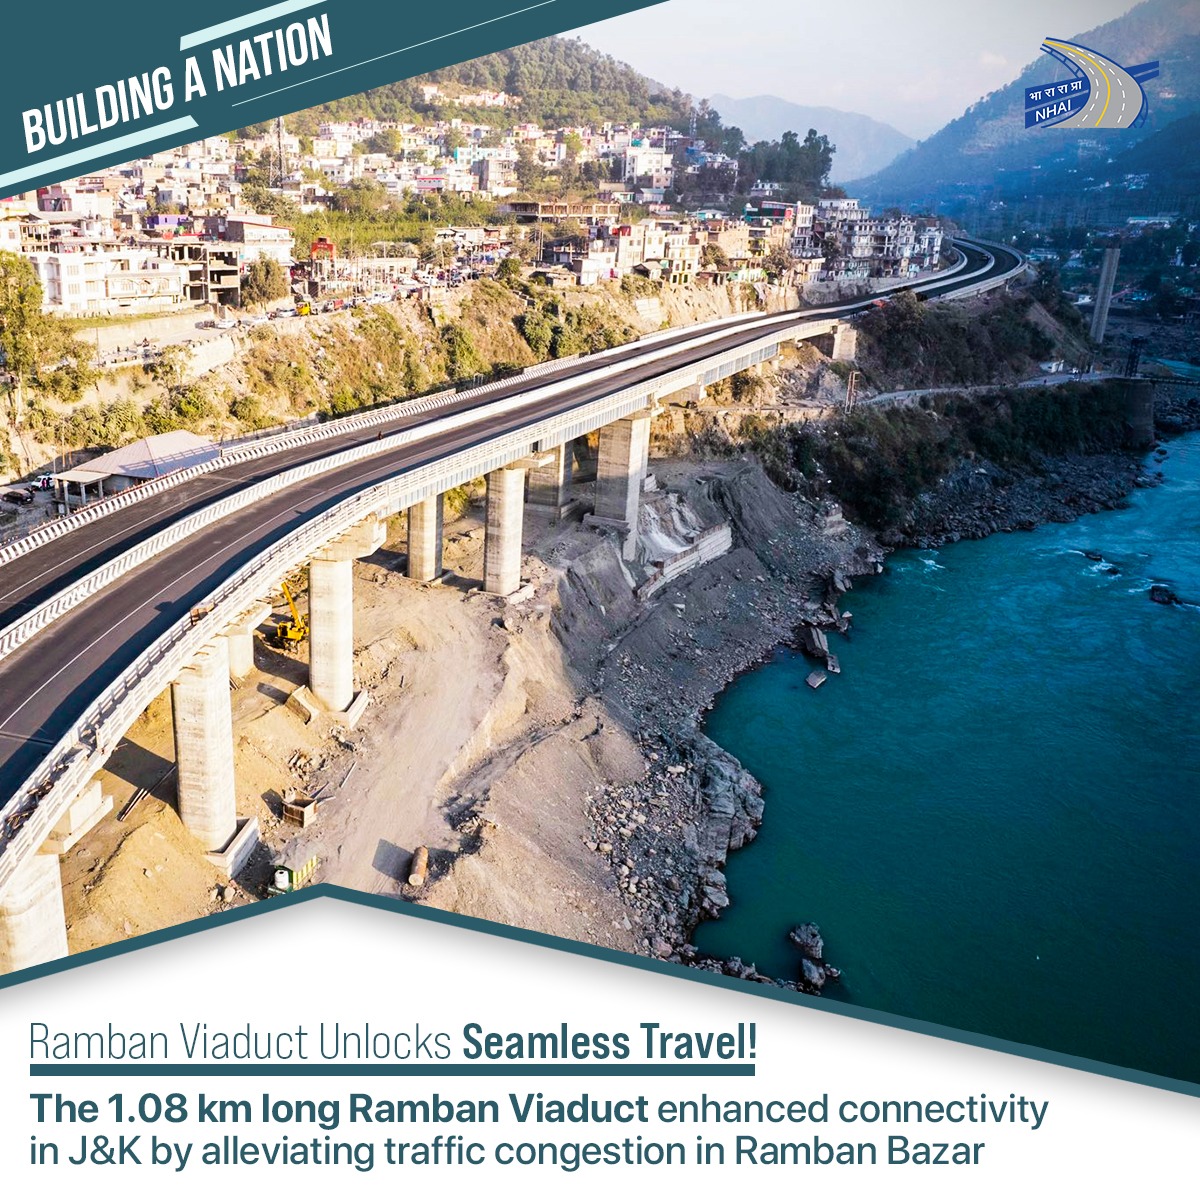 Situated on the #Udhampur-#Ramban section of NH-44, the 4-lane #RambanViaduct is built on typical Himalayan terrain, notably on the deep valley side, to avoid disturbing the fragile hill slopes. It also ensures provide all-weather connectivity to #Kashmir from the rest of #India.